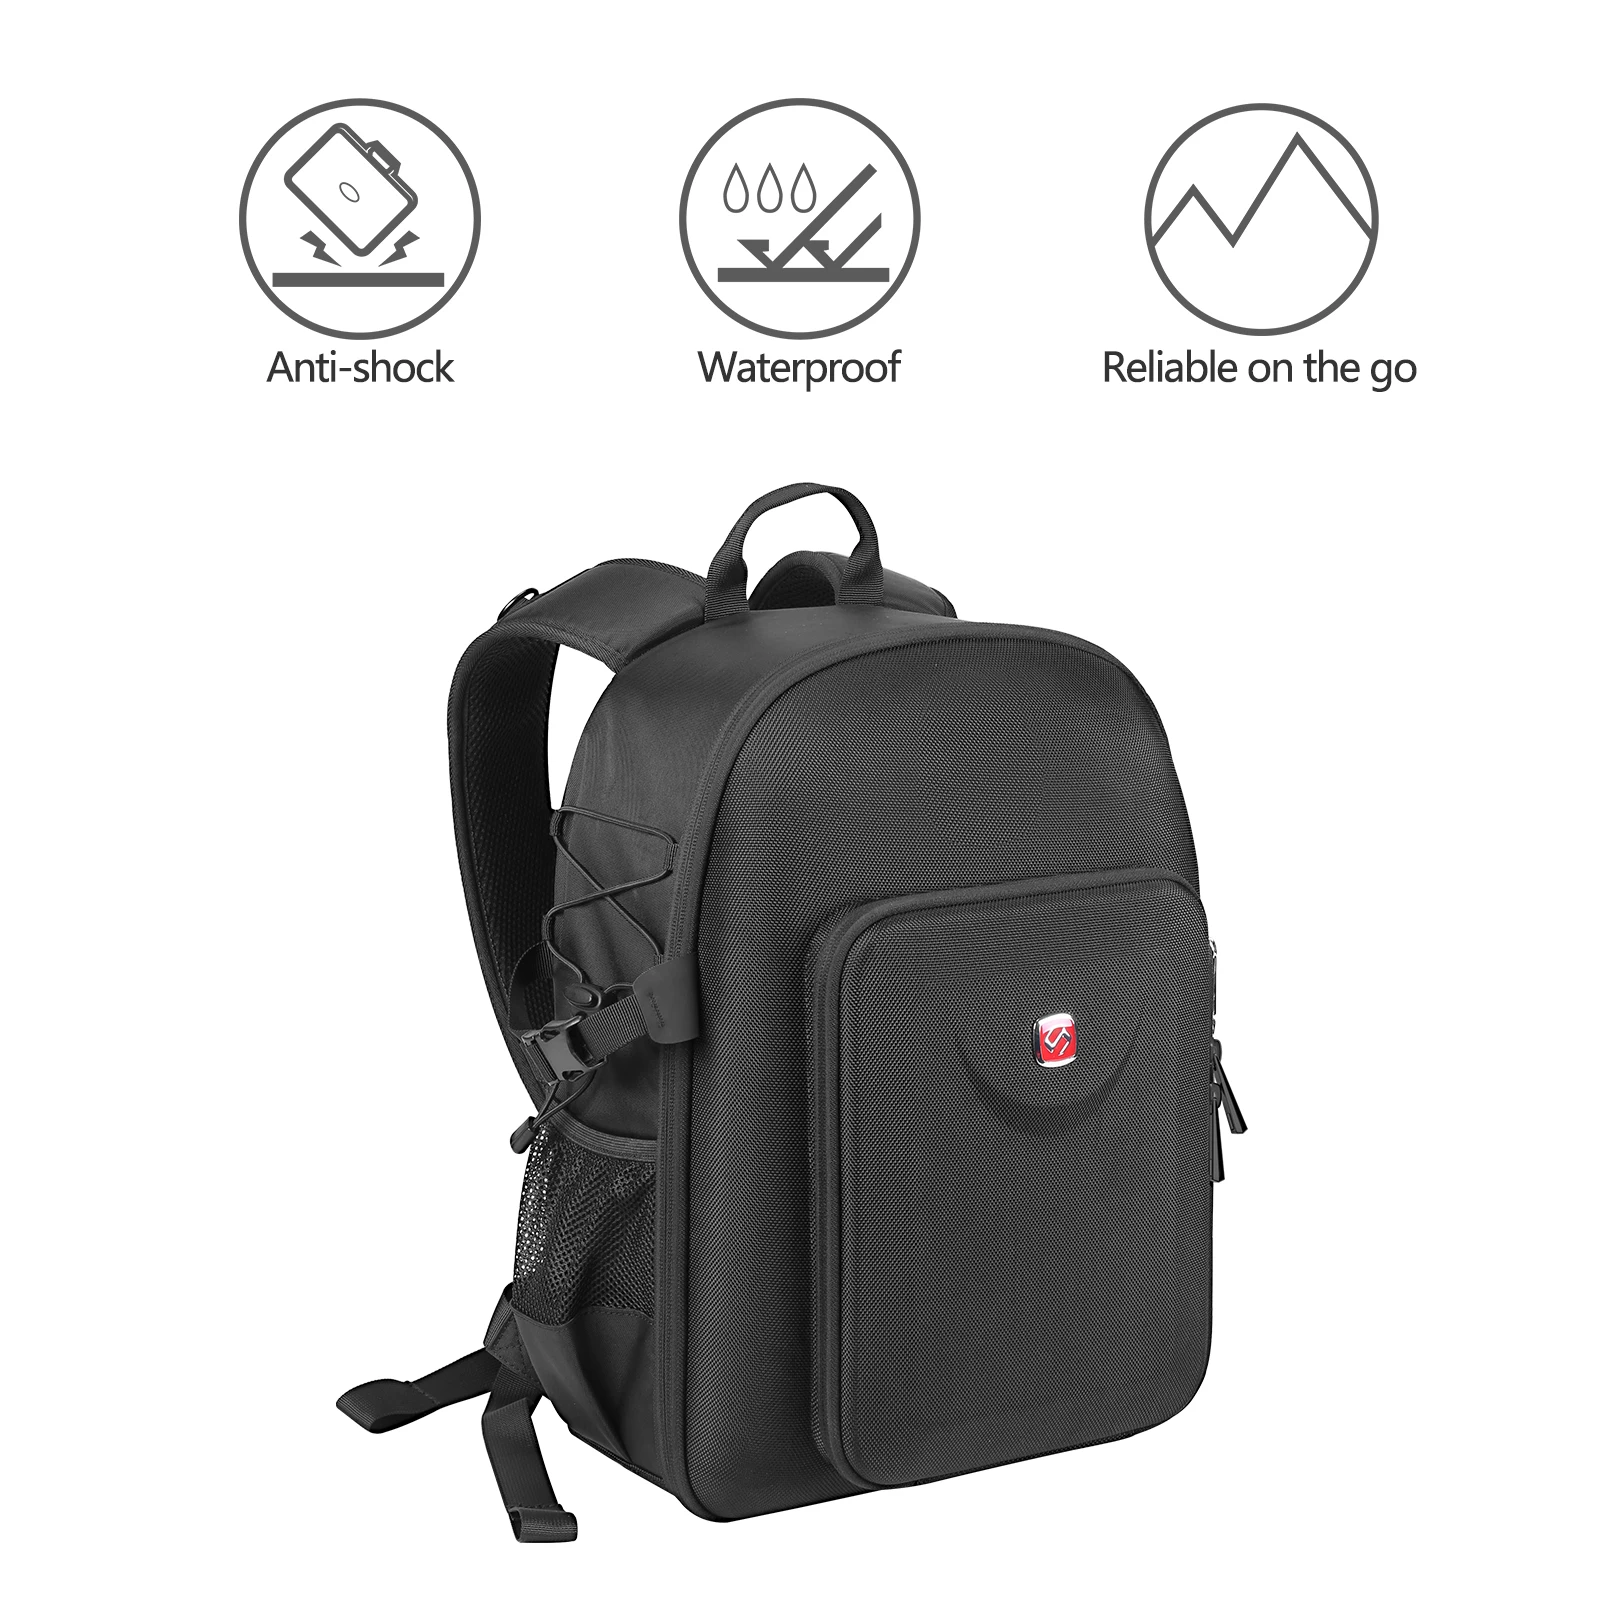 Backpack Carryiing Bag For Dji Mavic 3 With Smart Controller Series Drone  Accessories - Buy Backpack Carryiing Bag,Backpack Carryiing Bag For Dji